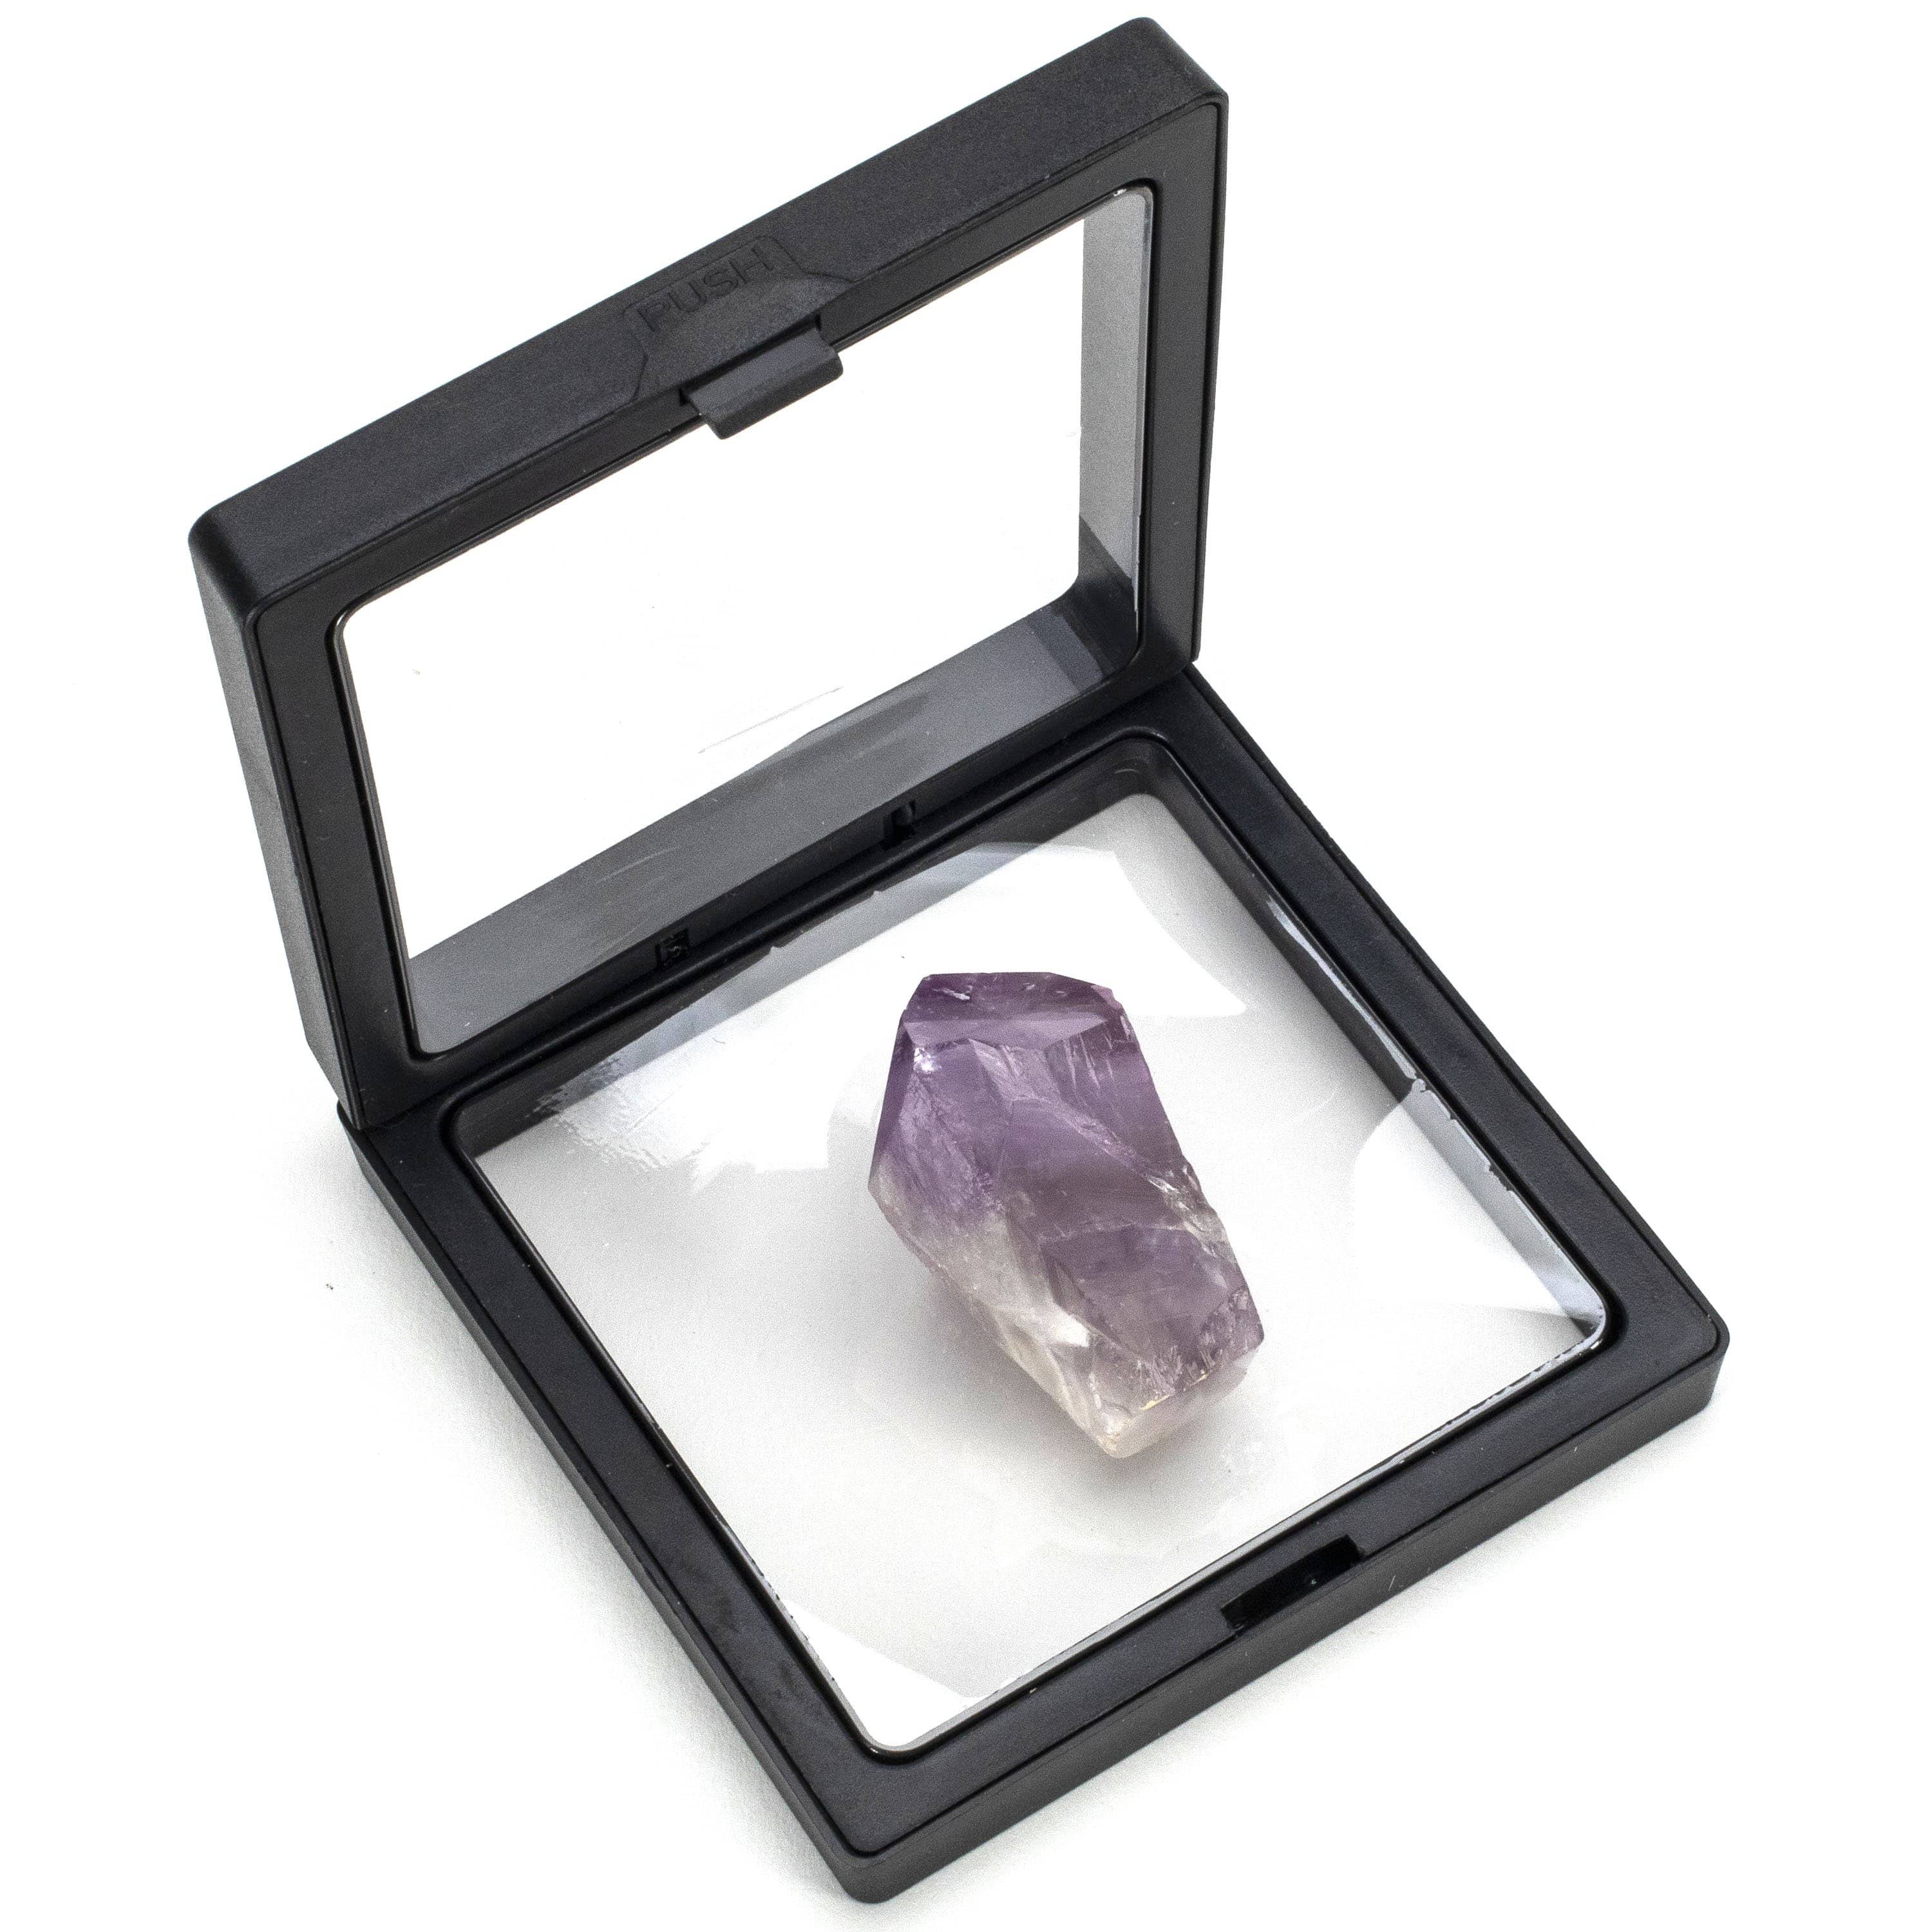 Kalifano Amethyst Natural Amethyst Point Healing Stone from Brazil AP20